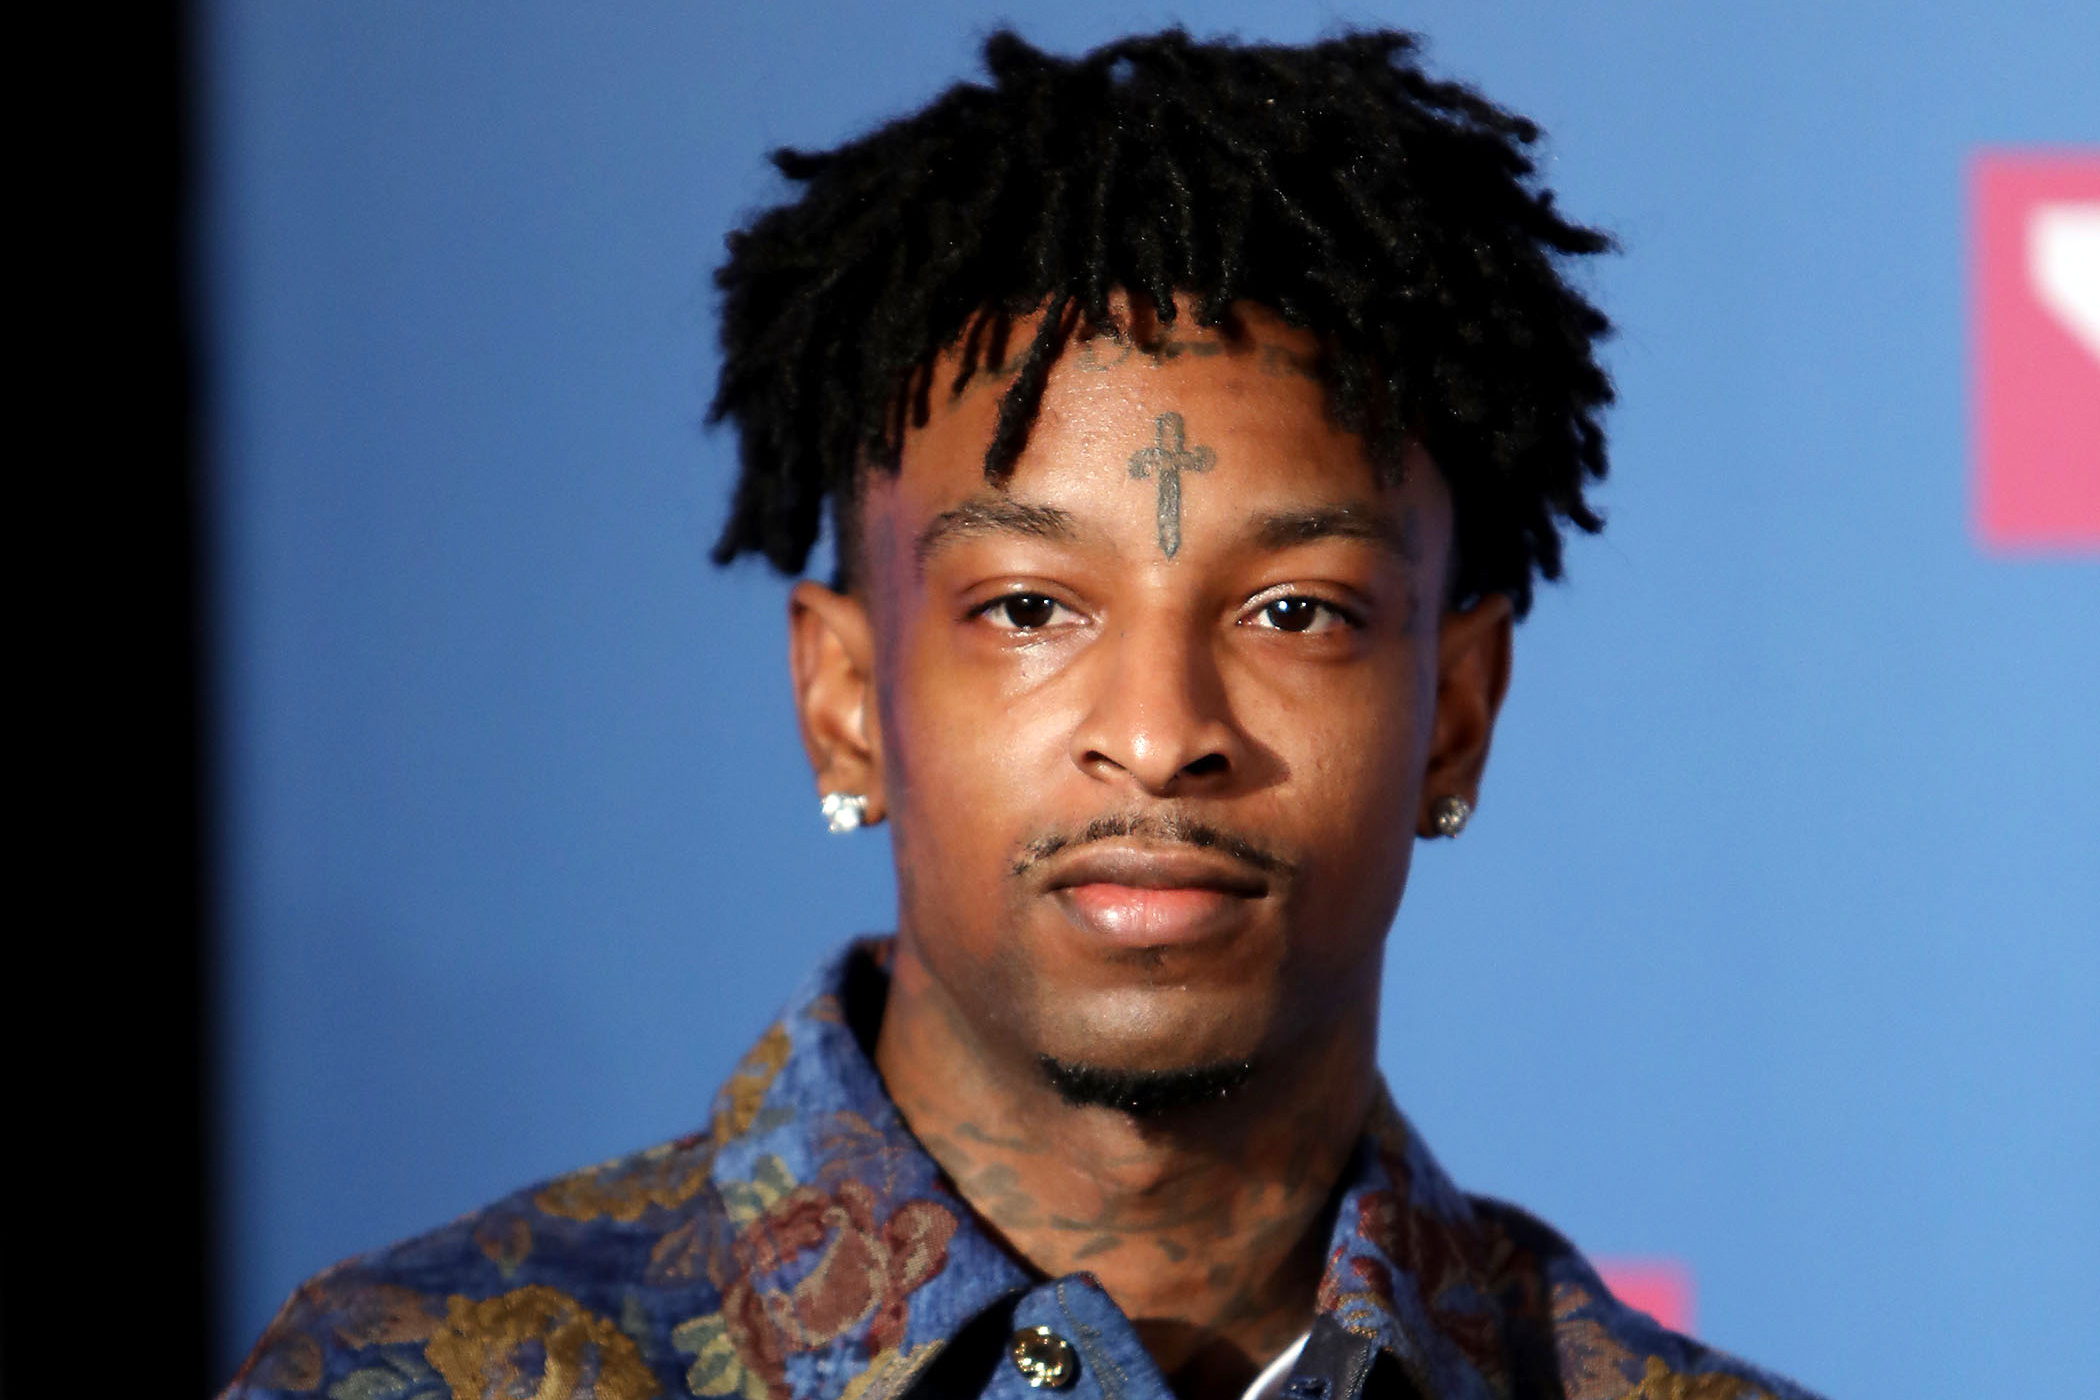 21 Savage, Immigration detention center, Rolling Stone feature, Challenging conditions, 2100x1400 HD Desktop